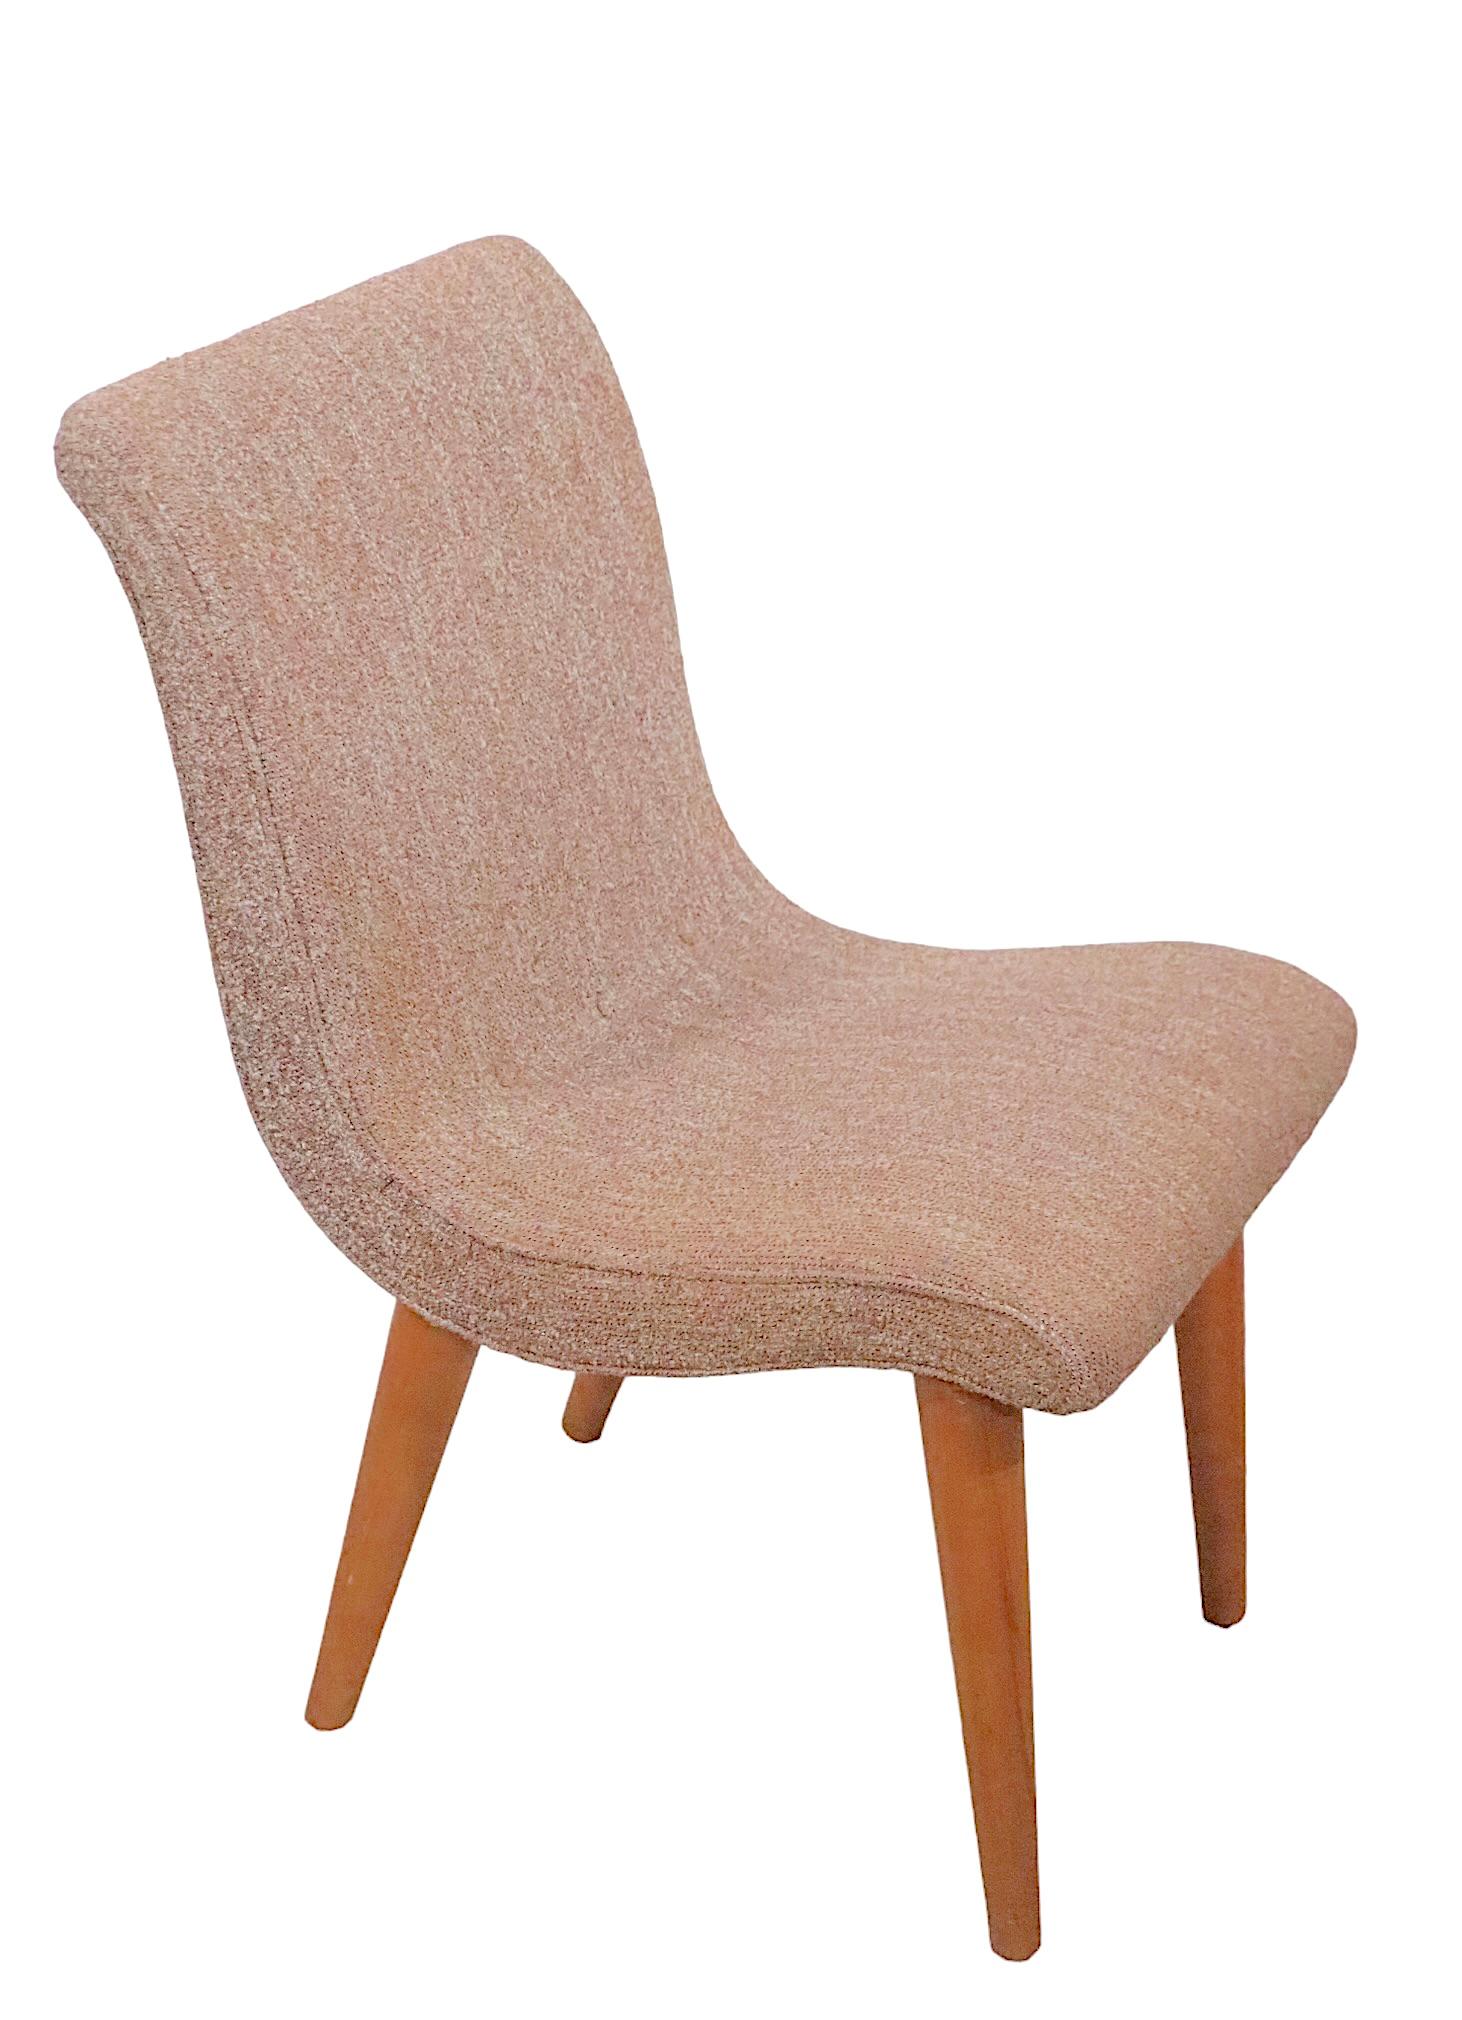 American Mid Century Side Dining Chair by Leslie Diamond for Conant Ball Modern Mates  For Sale